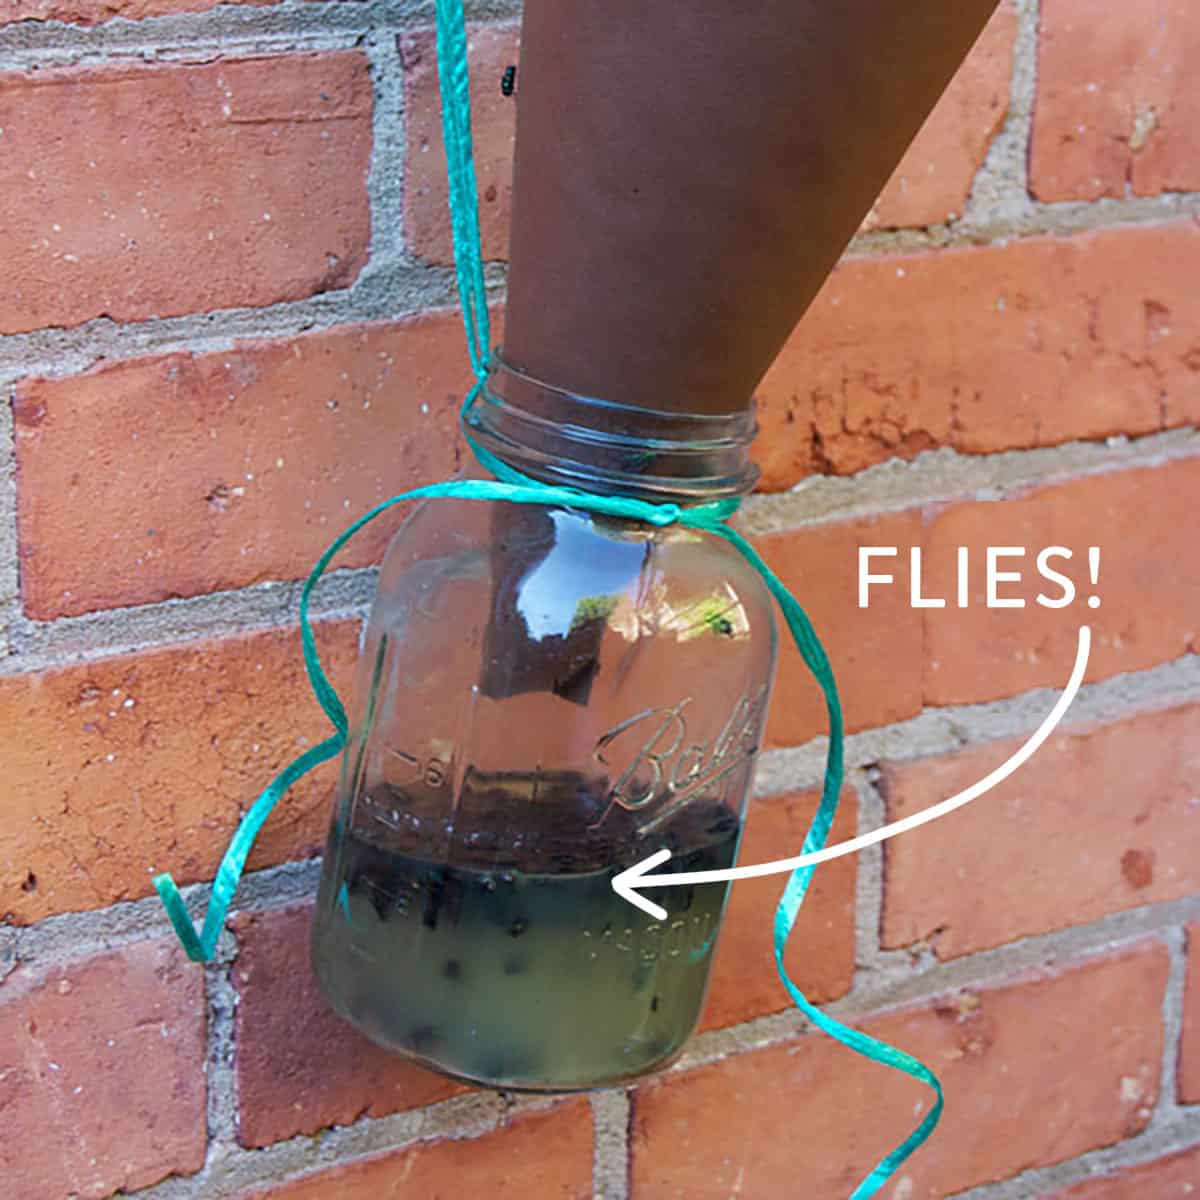 How to Make a Homemade Fly Trap with a Regular Plastic Bottle